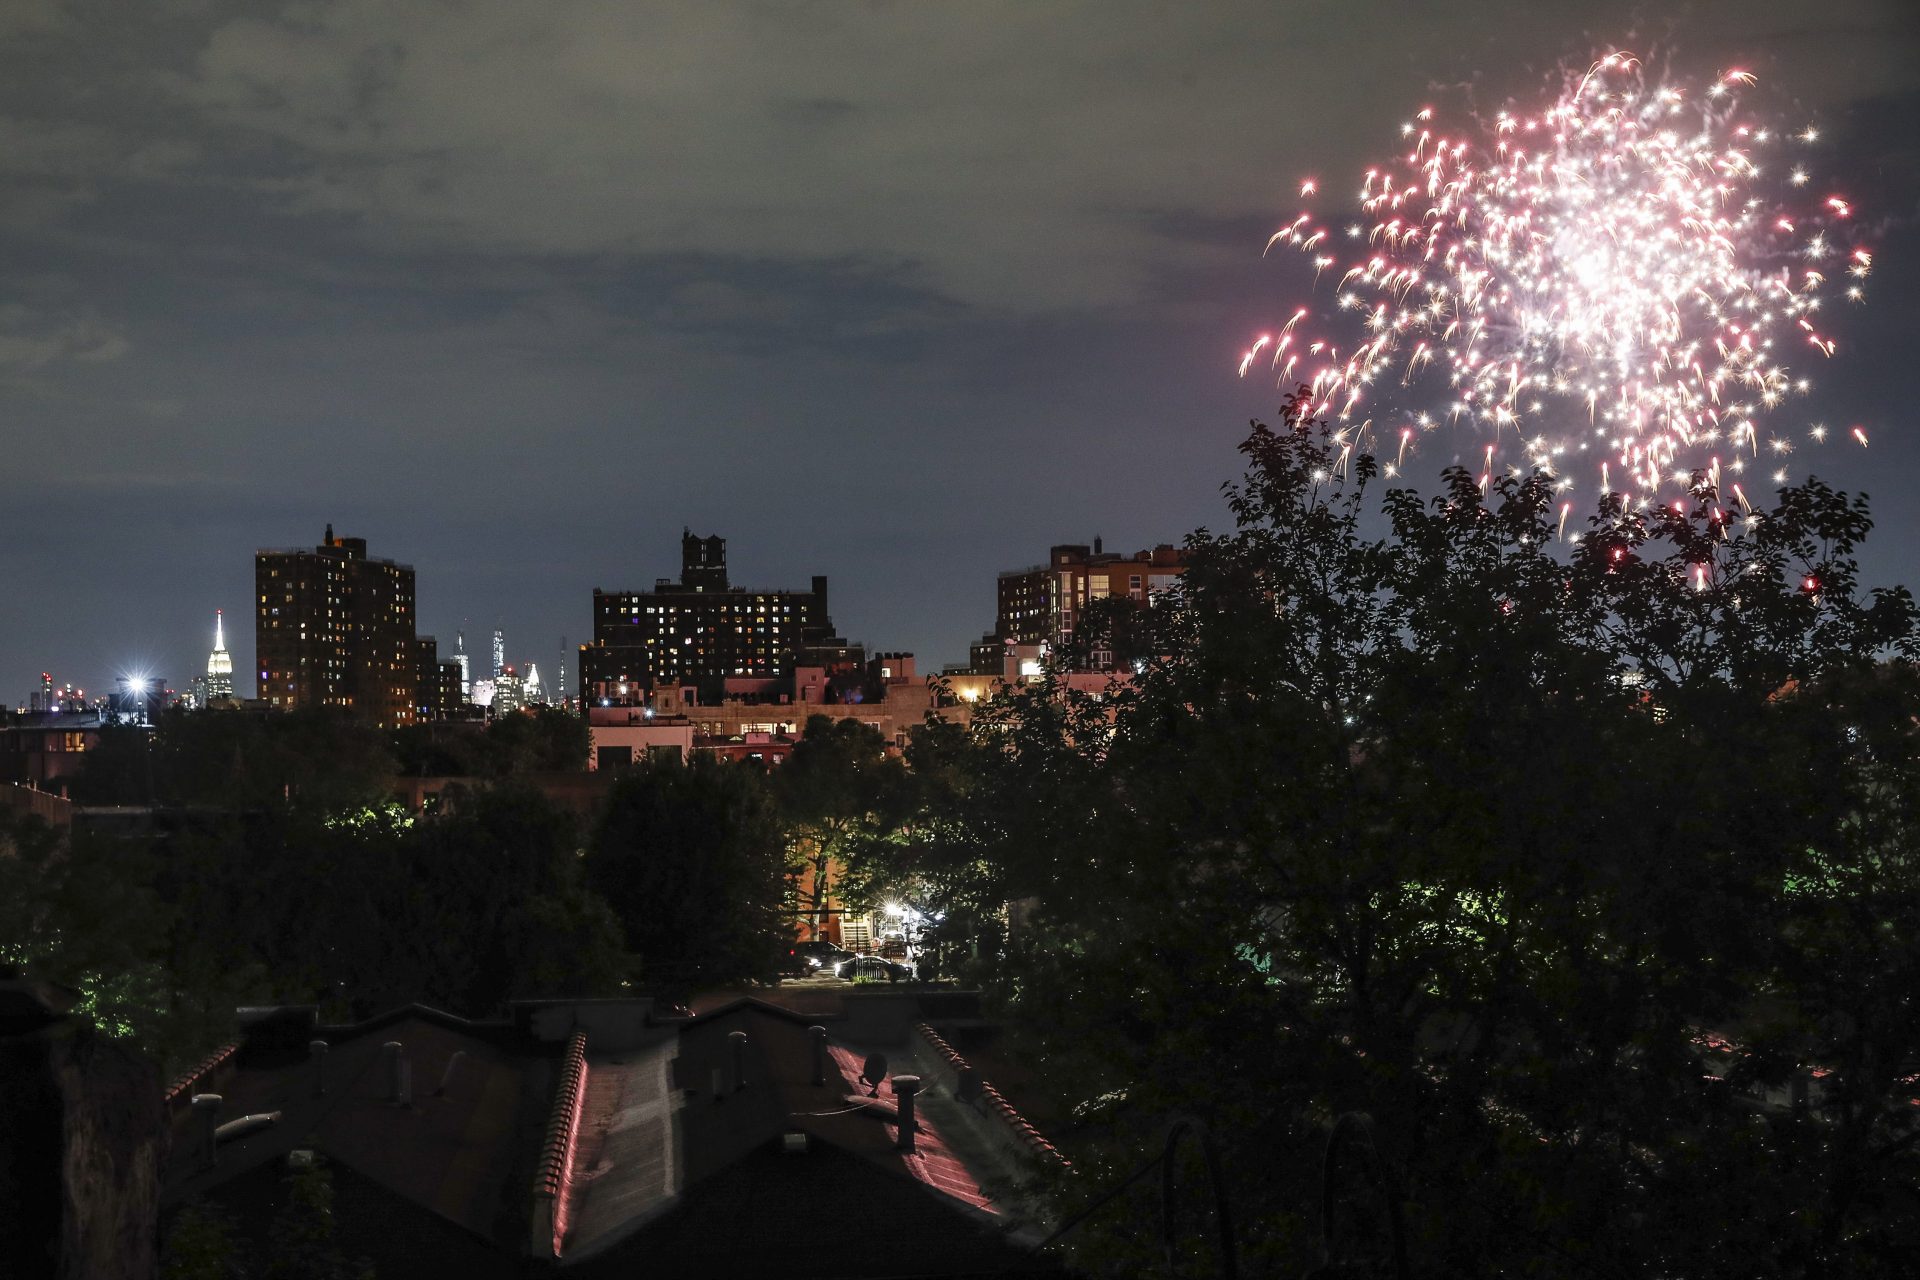 Fireworks explode during Juneteenth celebrations above the Bedford-Stuyvesant neighborhood in the Brooklyn borough of New York, Friday, June 19, 2020. Juneteenth is the holiday celebrating the day in 1865 that enslaved Black people in Galveston, Texas, learned they had been freed from bondage, more than two years after the Emancipation Proclamation.